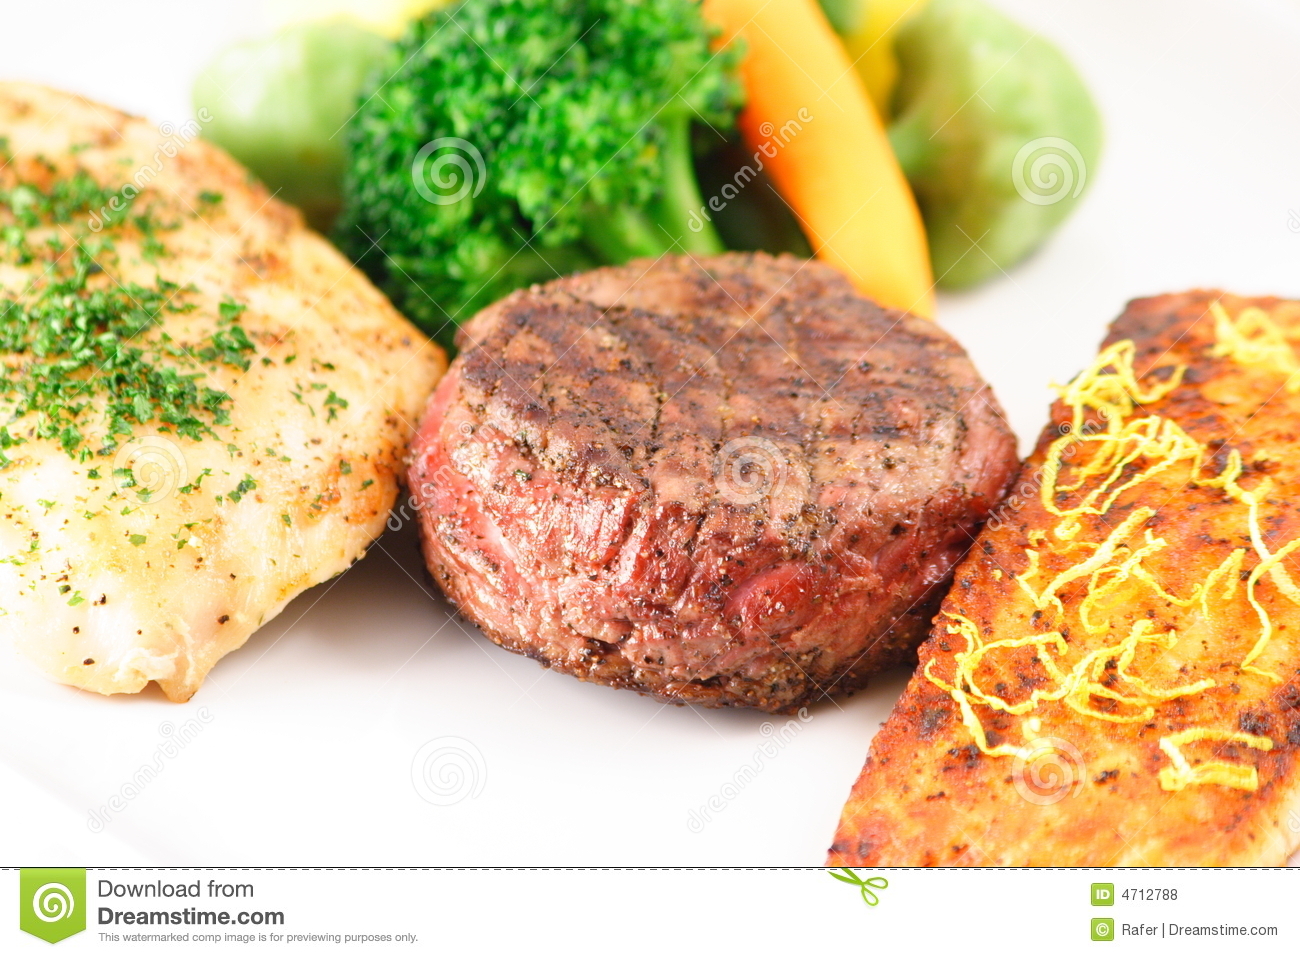 Maximum Protein Meal Royalty Free Stock Photos   Image  4712788